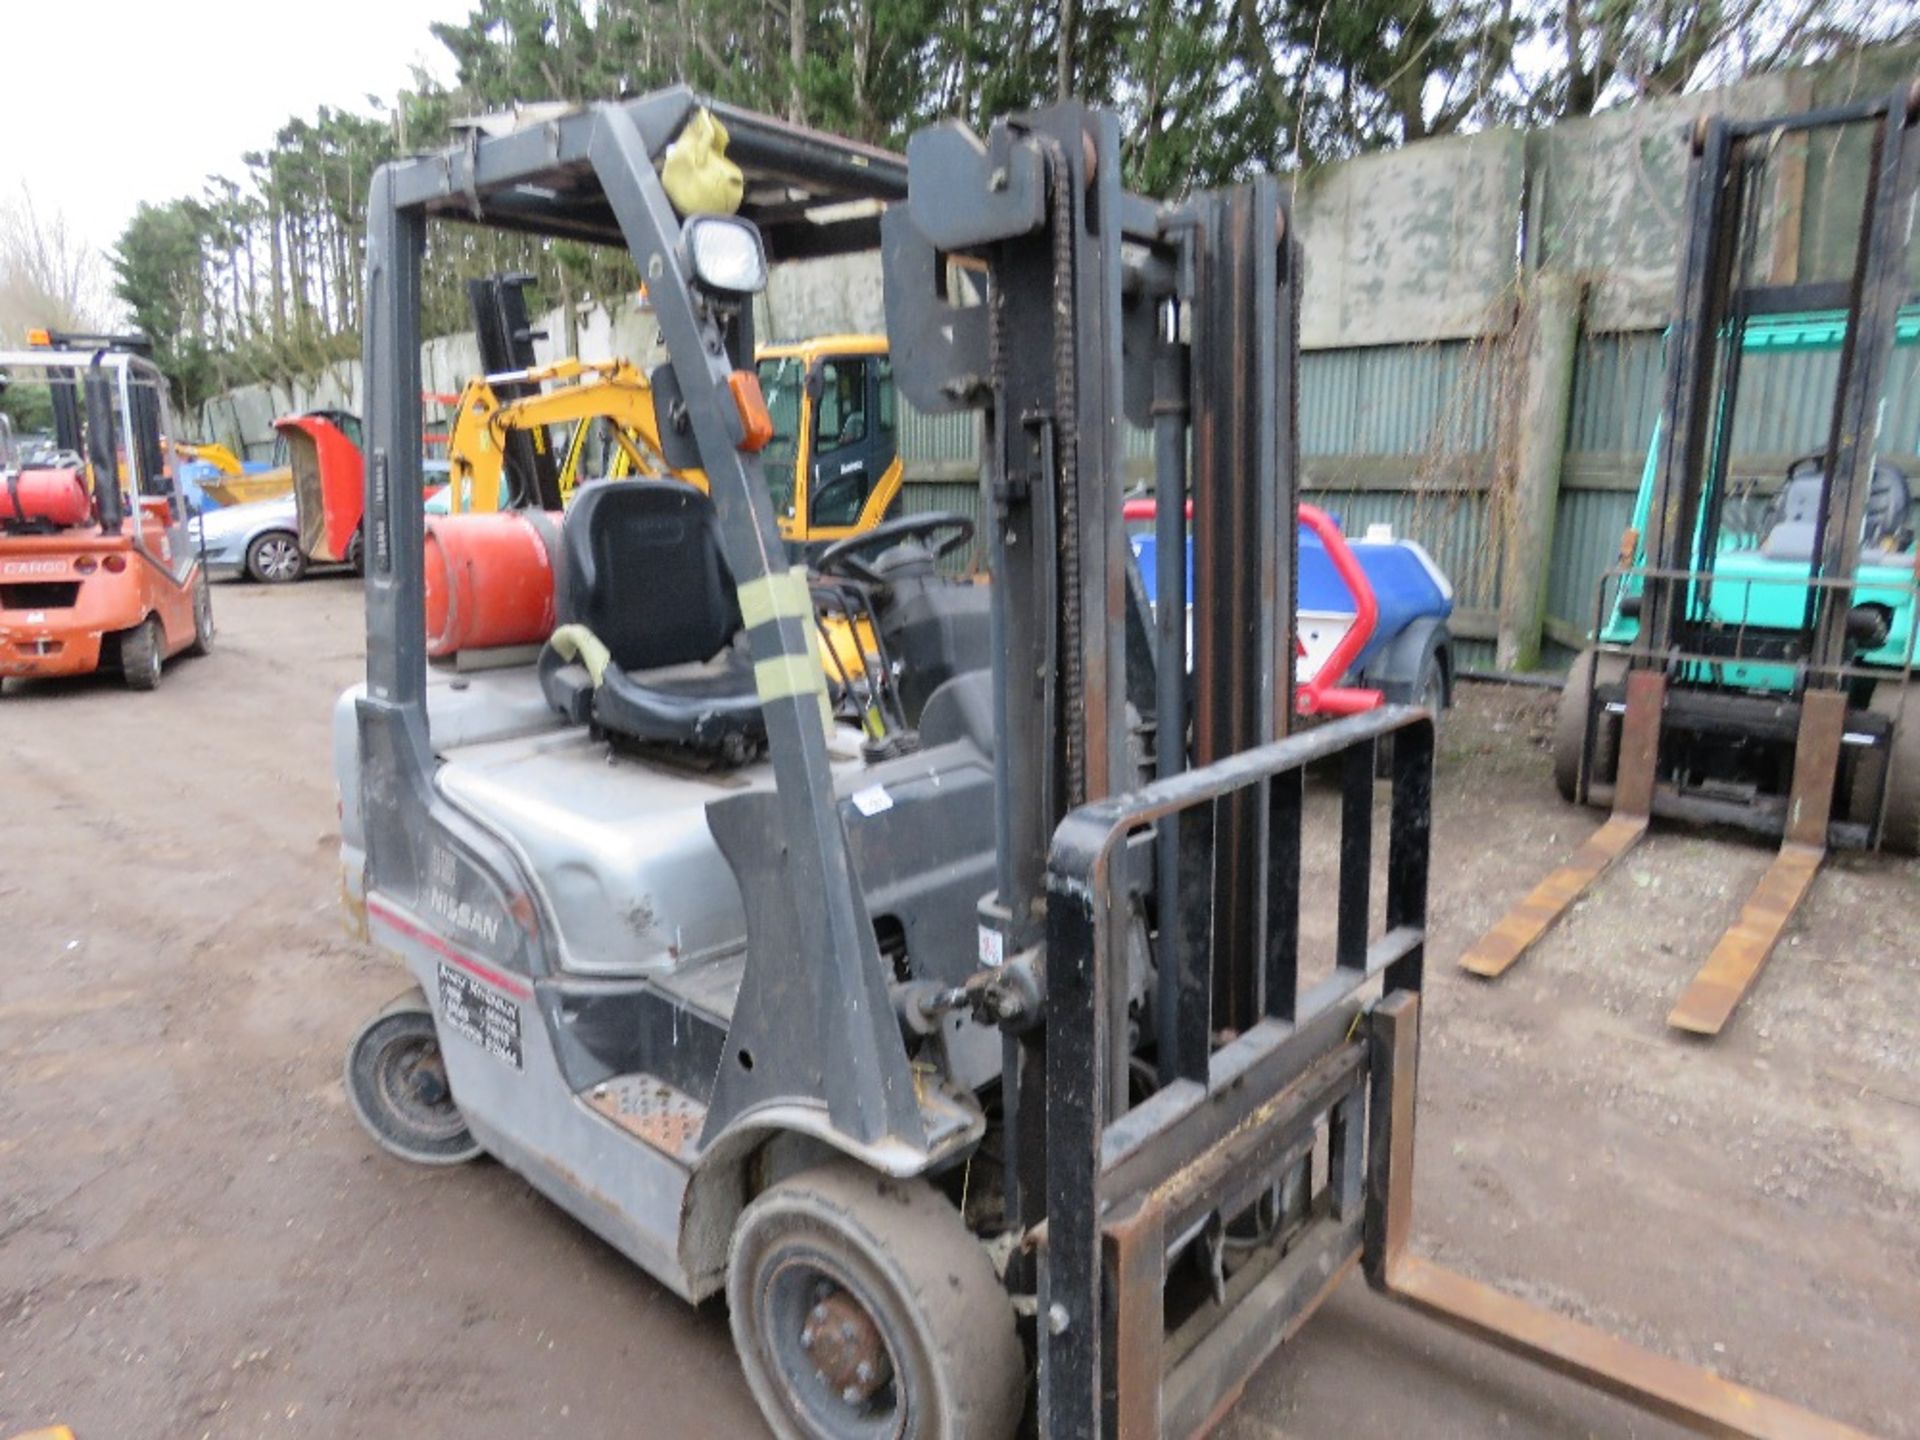 NISSAN 1.5TONNE CAPACITY GAS POWERED FORKLIFT TRUCK SN:L01-000622, 3260 REC HOURS. LOW MAST HEIGHT. - Image 2 of 10